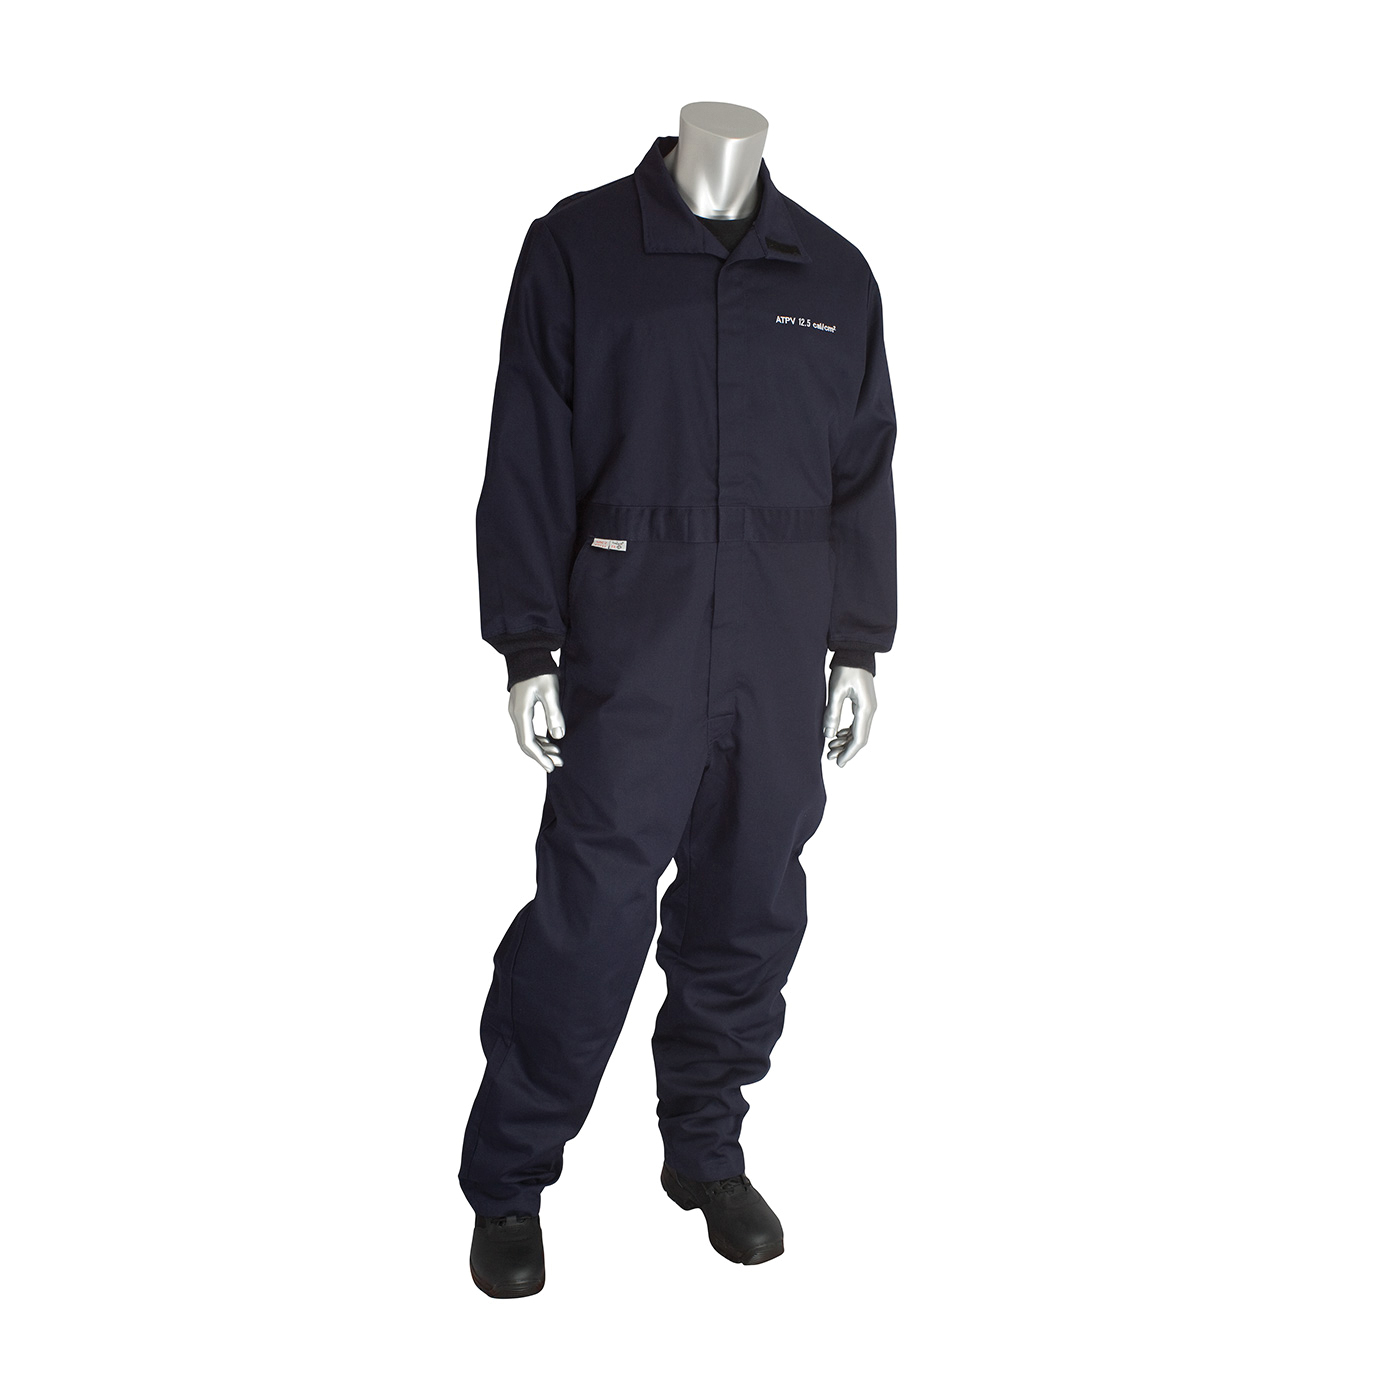 PIP® 9100-2170D/4X Flame Resistant Coverall, 4XL, Navy, 90% Cotton/10% Nylon/FR Twill Weave, 60 to 62 in Chest, 32 in L Inseam